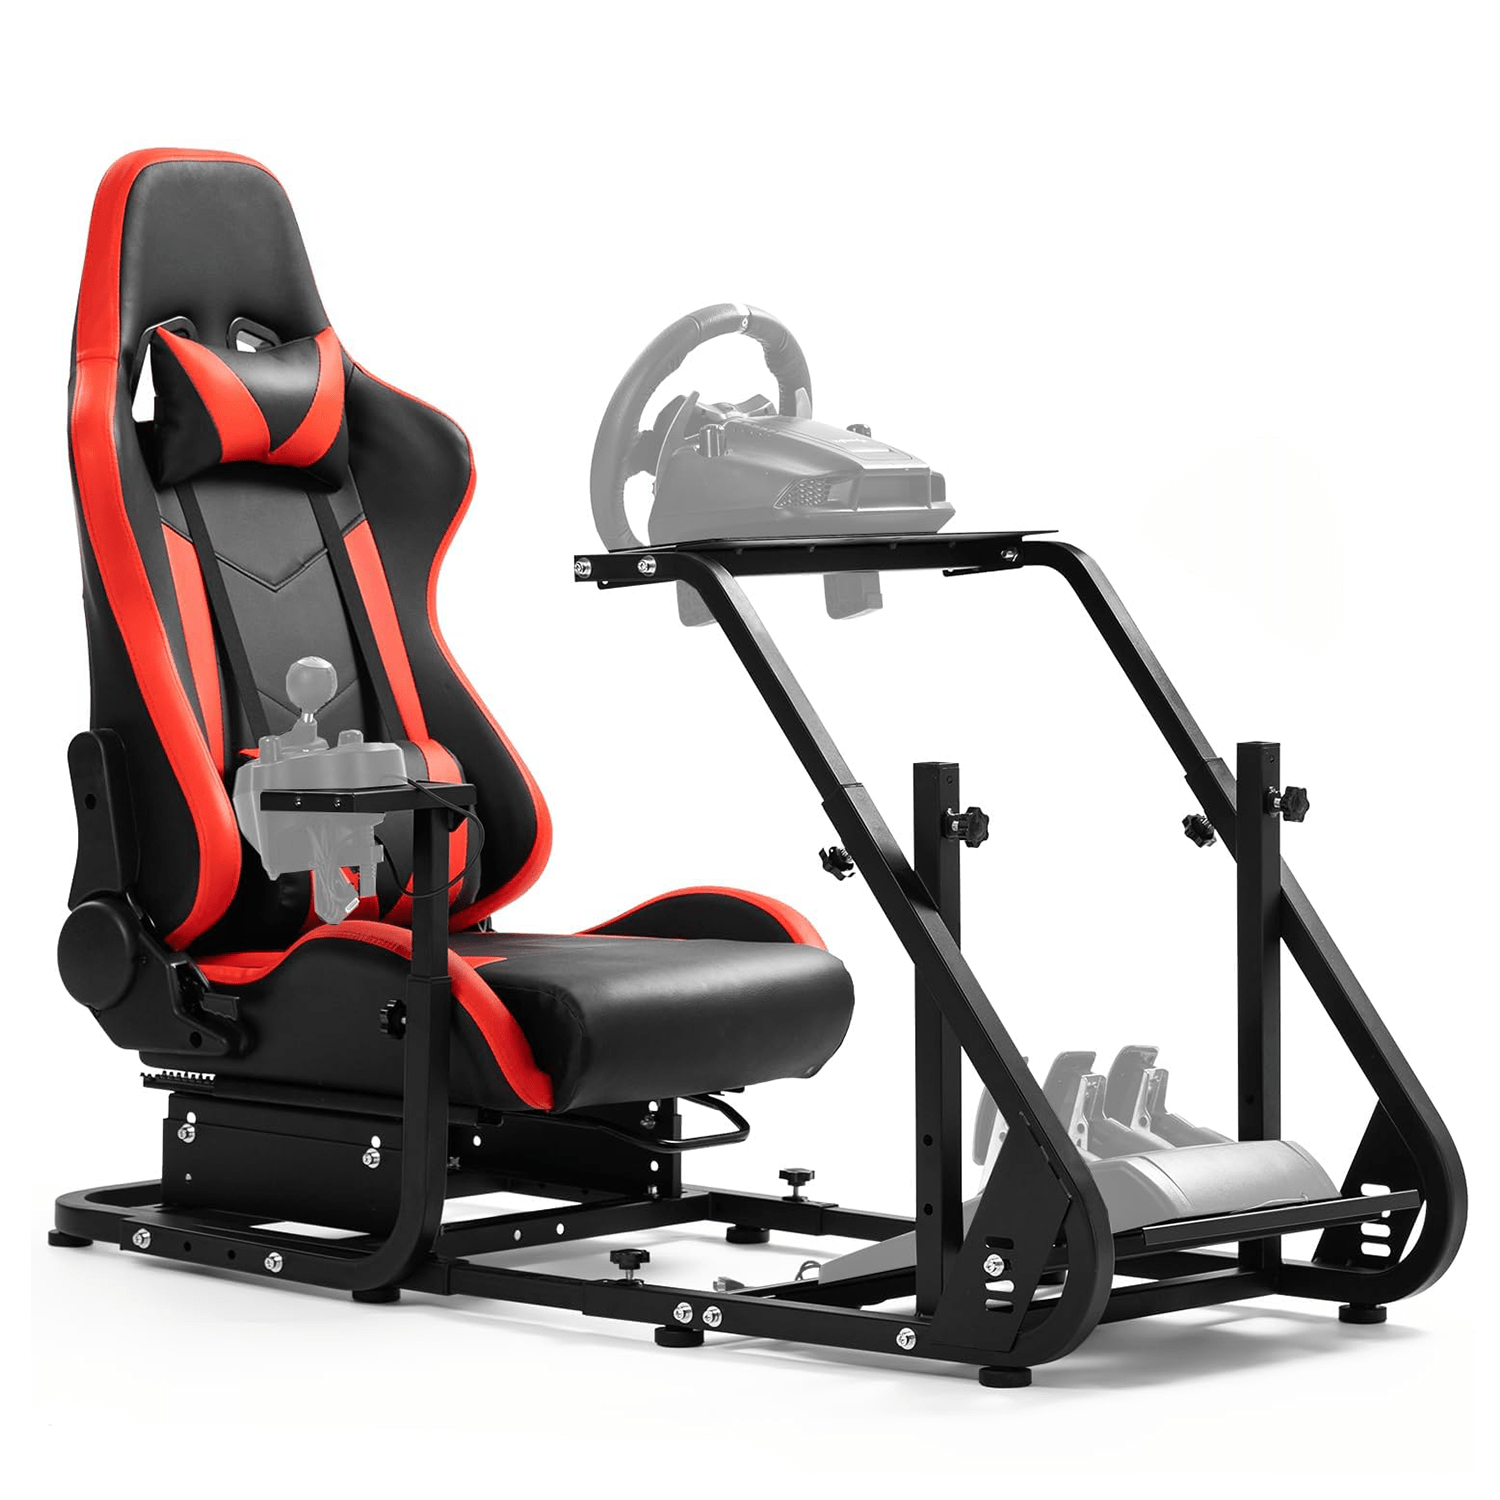 

Game Racing Sim Simulator Cockpit With Red Racing Seat, Adjustable Driving Gaming Sim Frame Fits /logitech// T300 T248,wheel Shifter Pedals Not Included